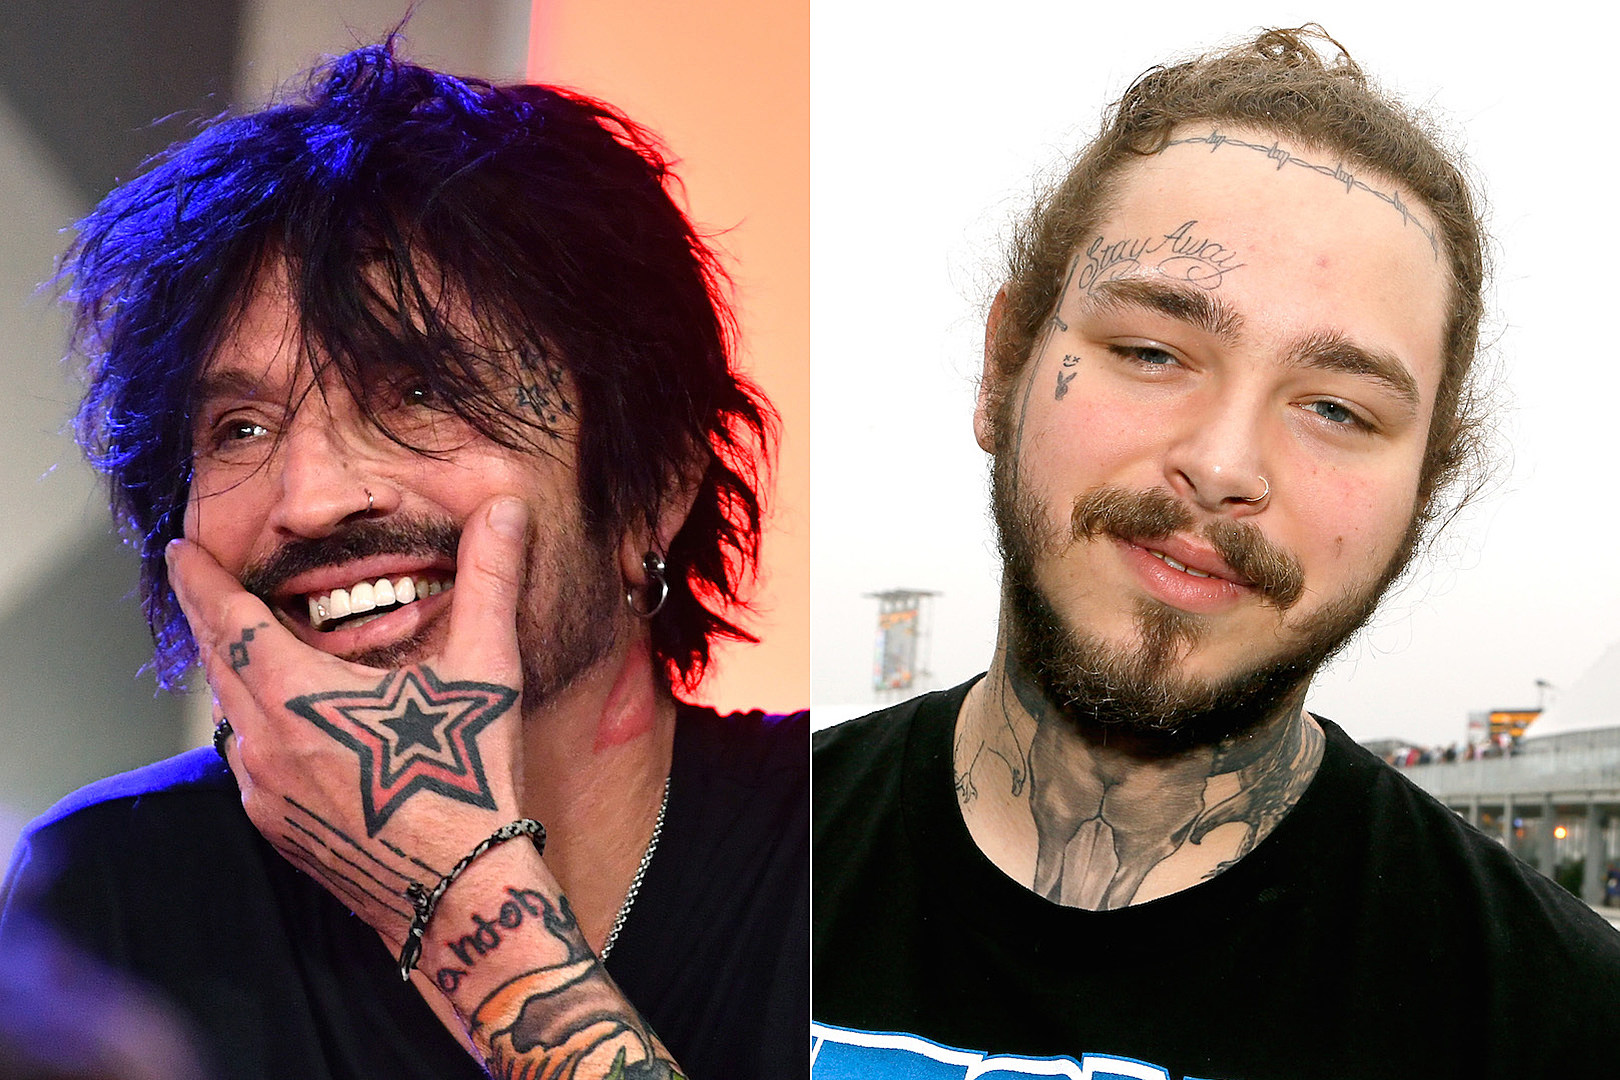 Motley Crue's Tommy Lee Featured in Post Malone Song 'Tommy Lee'